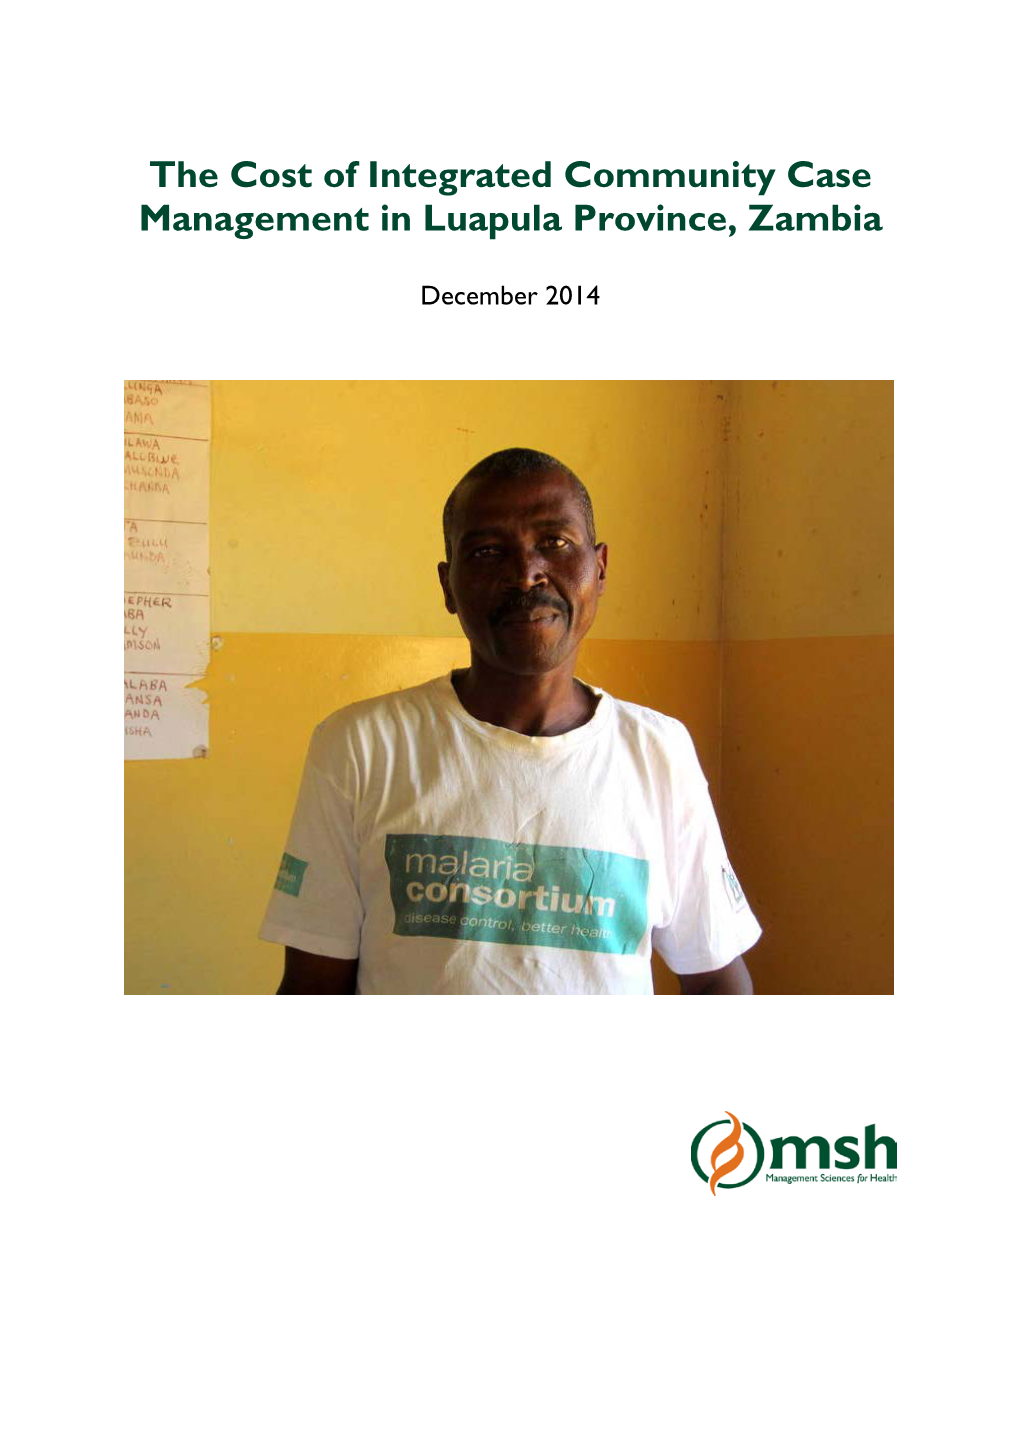 The Cost of Integrated Community Case Management in Luapula Province, Zambia